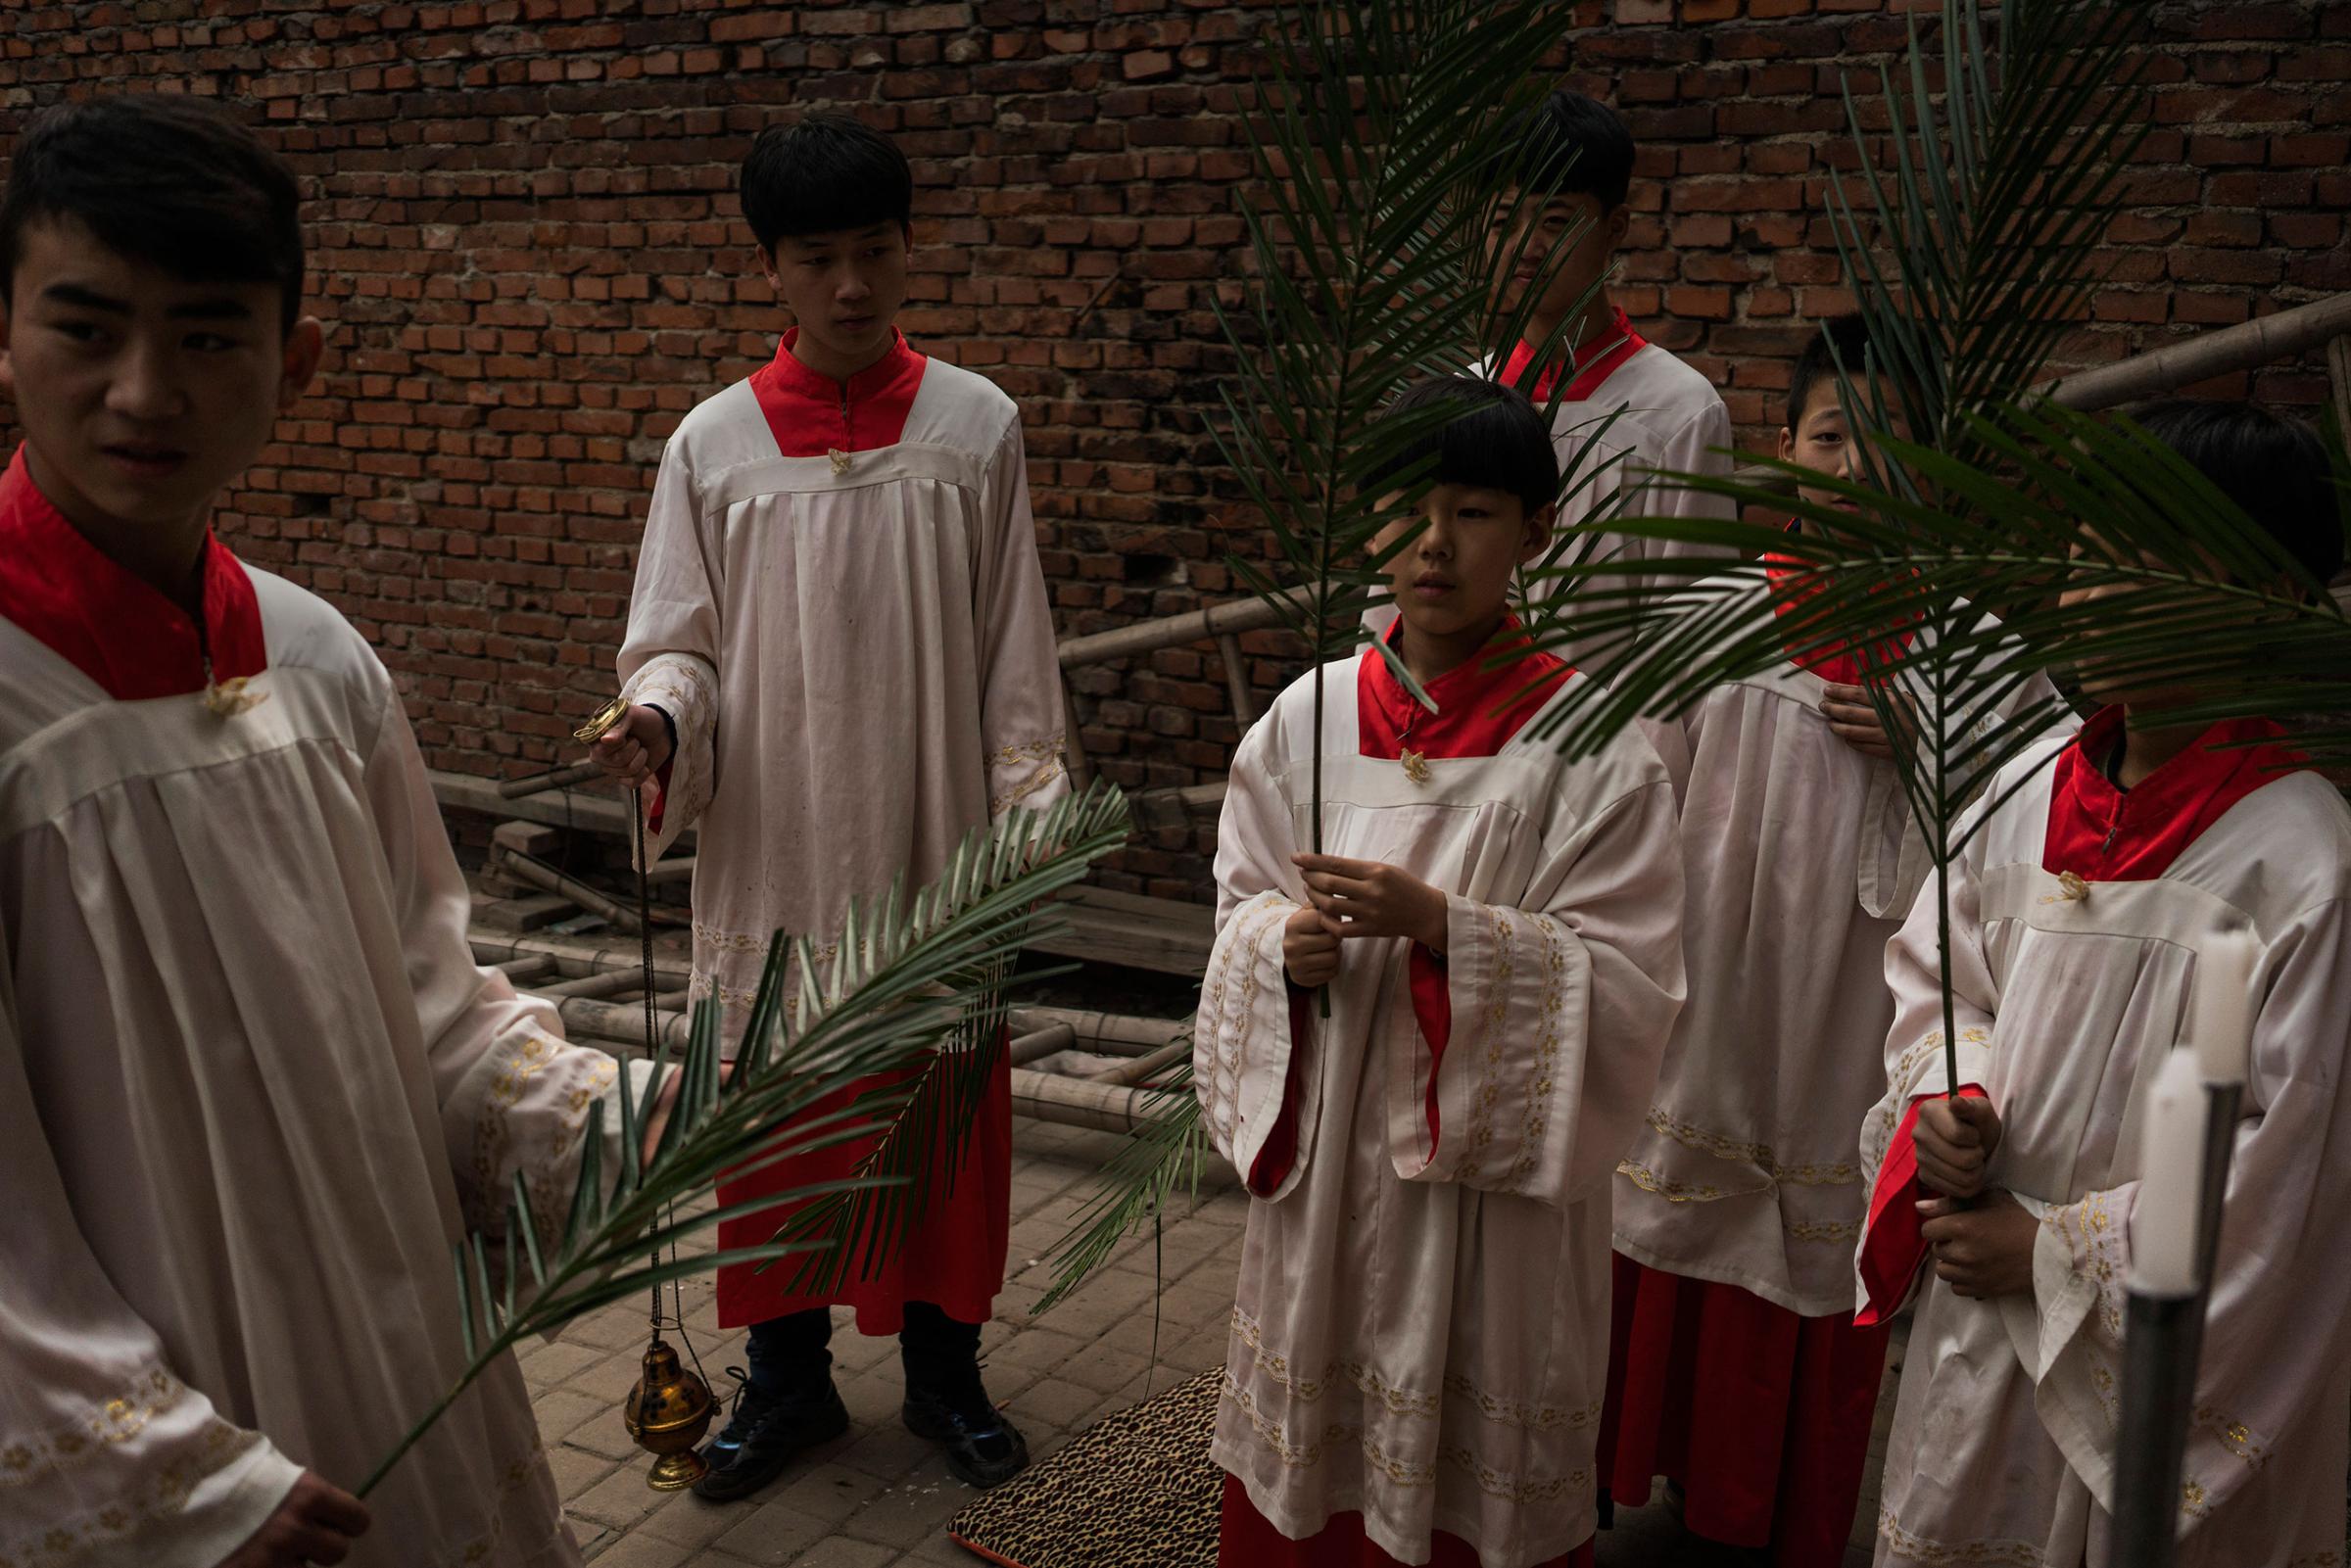 Altar boys prepare for an underground Palm Sunday service in the yard of a house in Youtong village, Shijiazhuang, China, March 20, 2016.